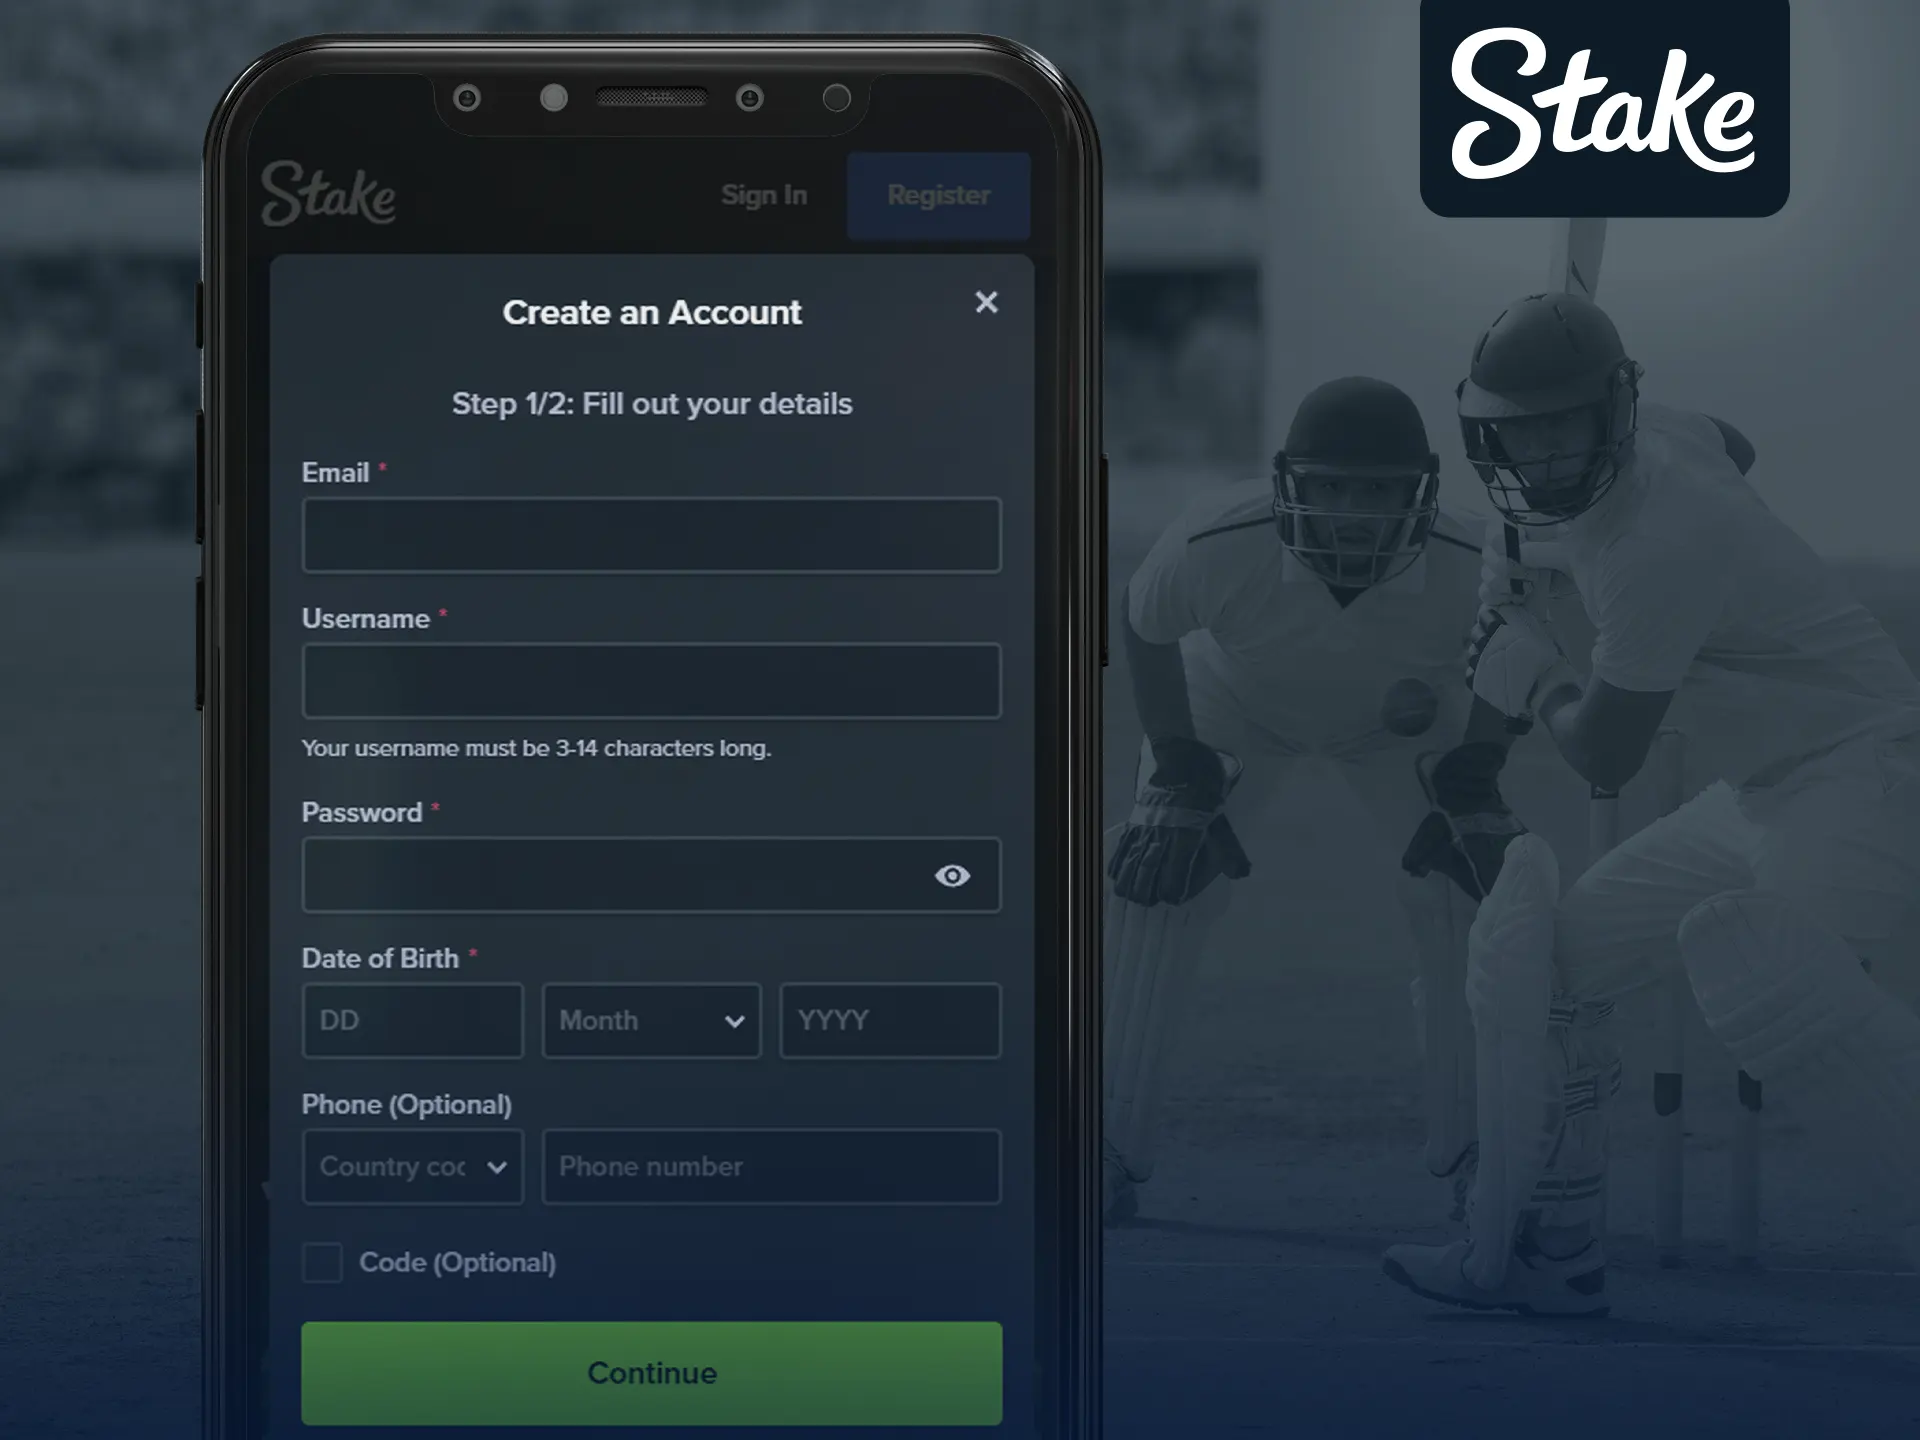 Registering on the Stake app is simple and quick.